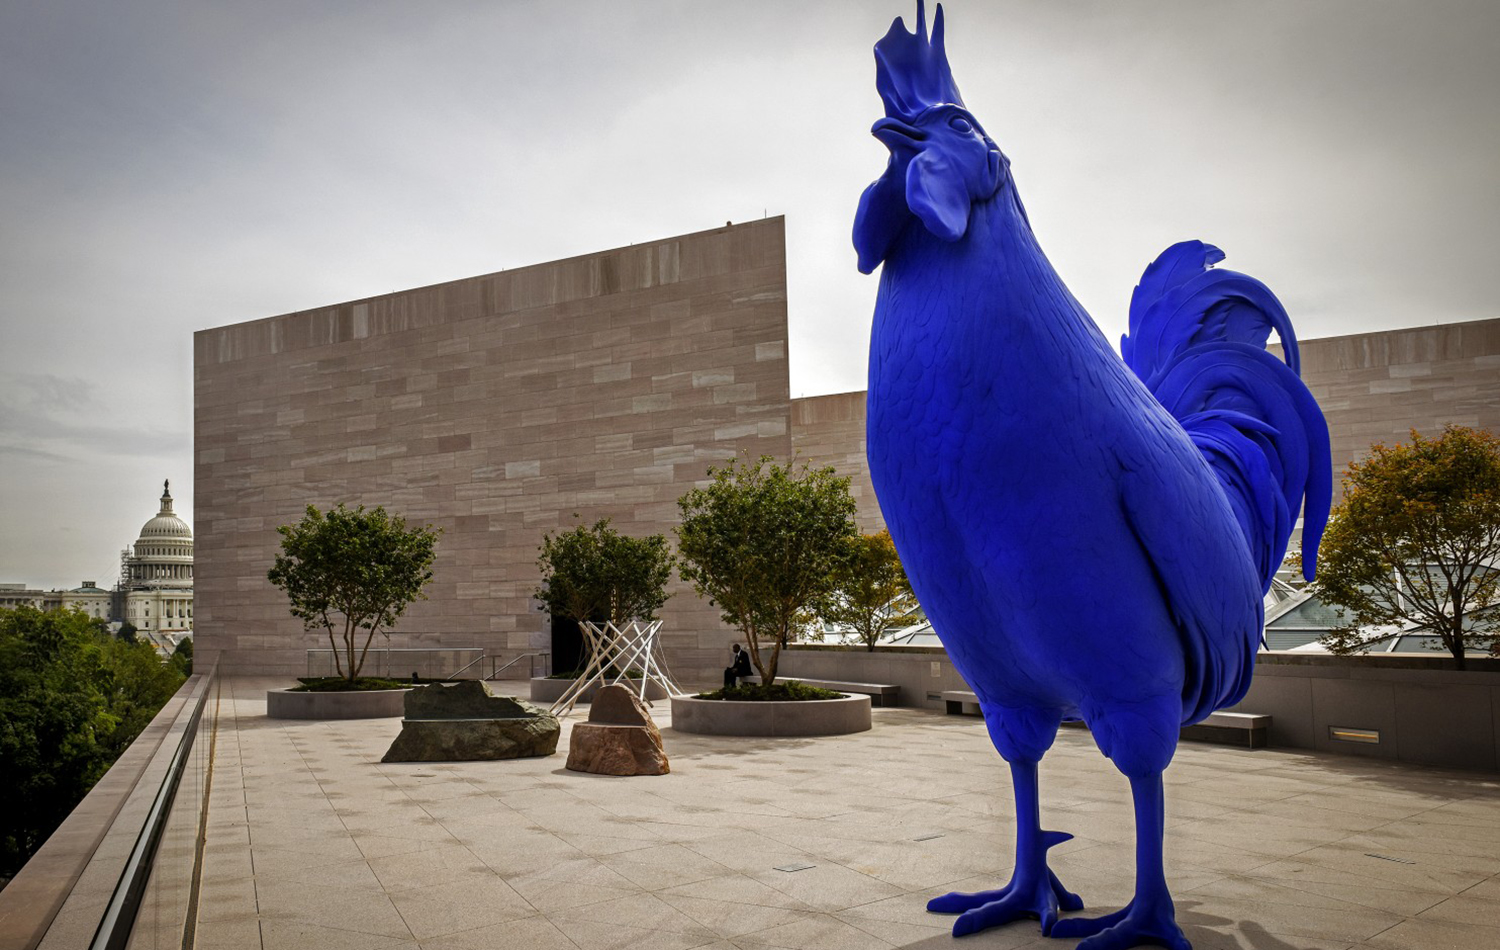  Katharina Fritsch's saturated-blue rooster sculpture, "Hahn/Cock" is on view in the building’s new sculpture terrace. (Bill O'Leary/The Washington Post) 